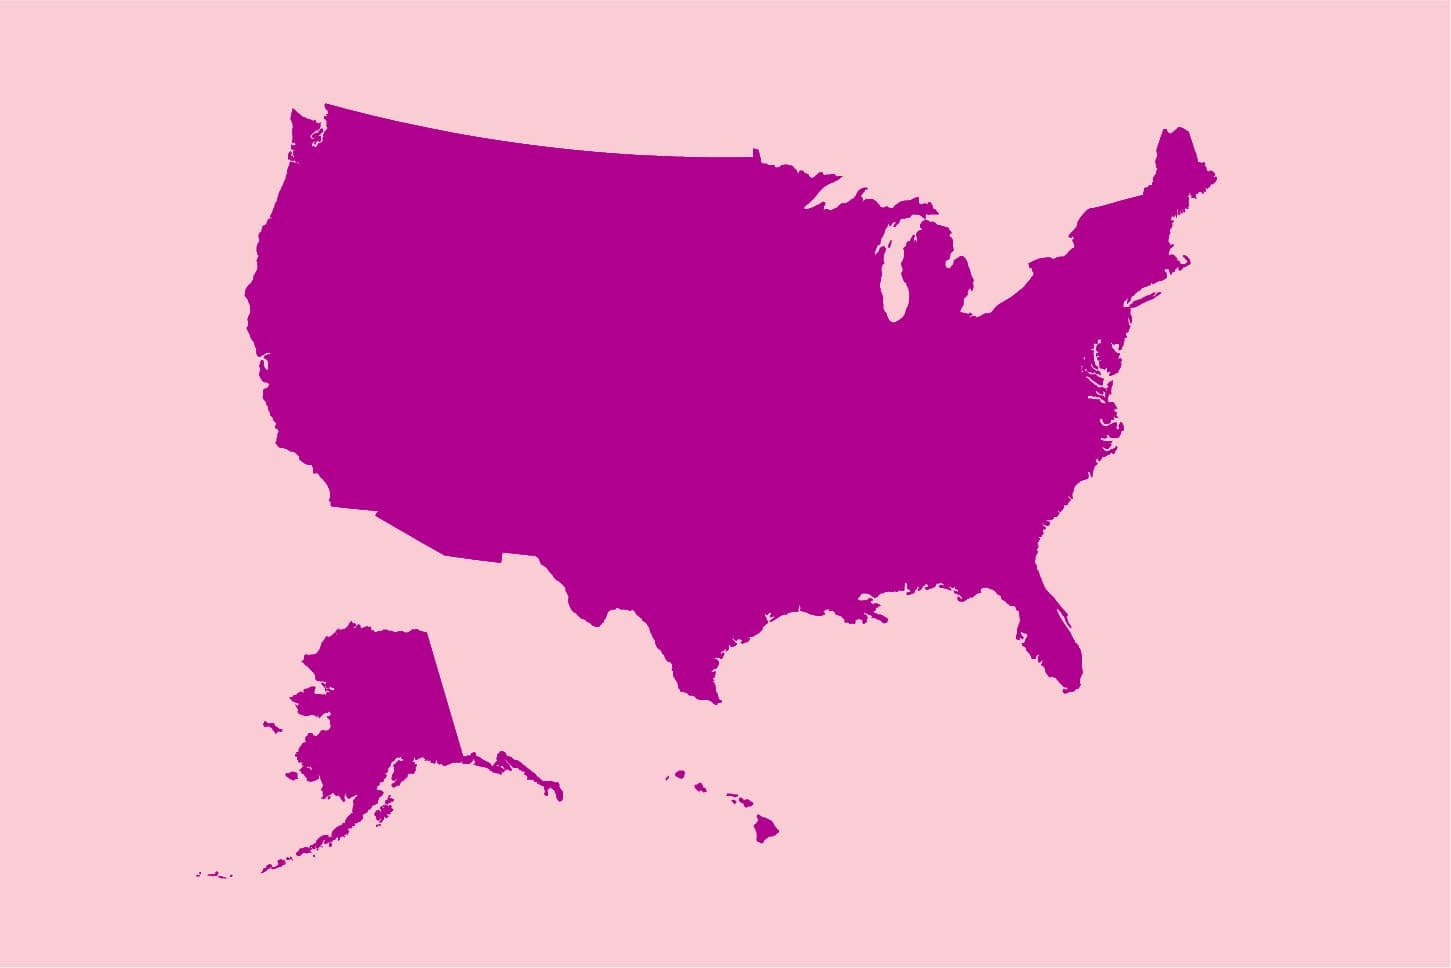 United States Outline Graphic